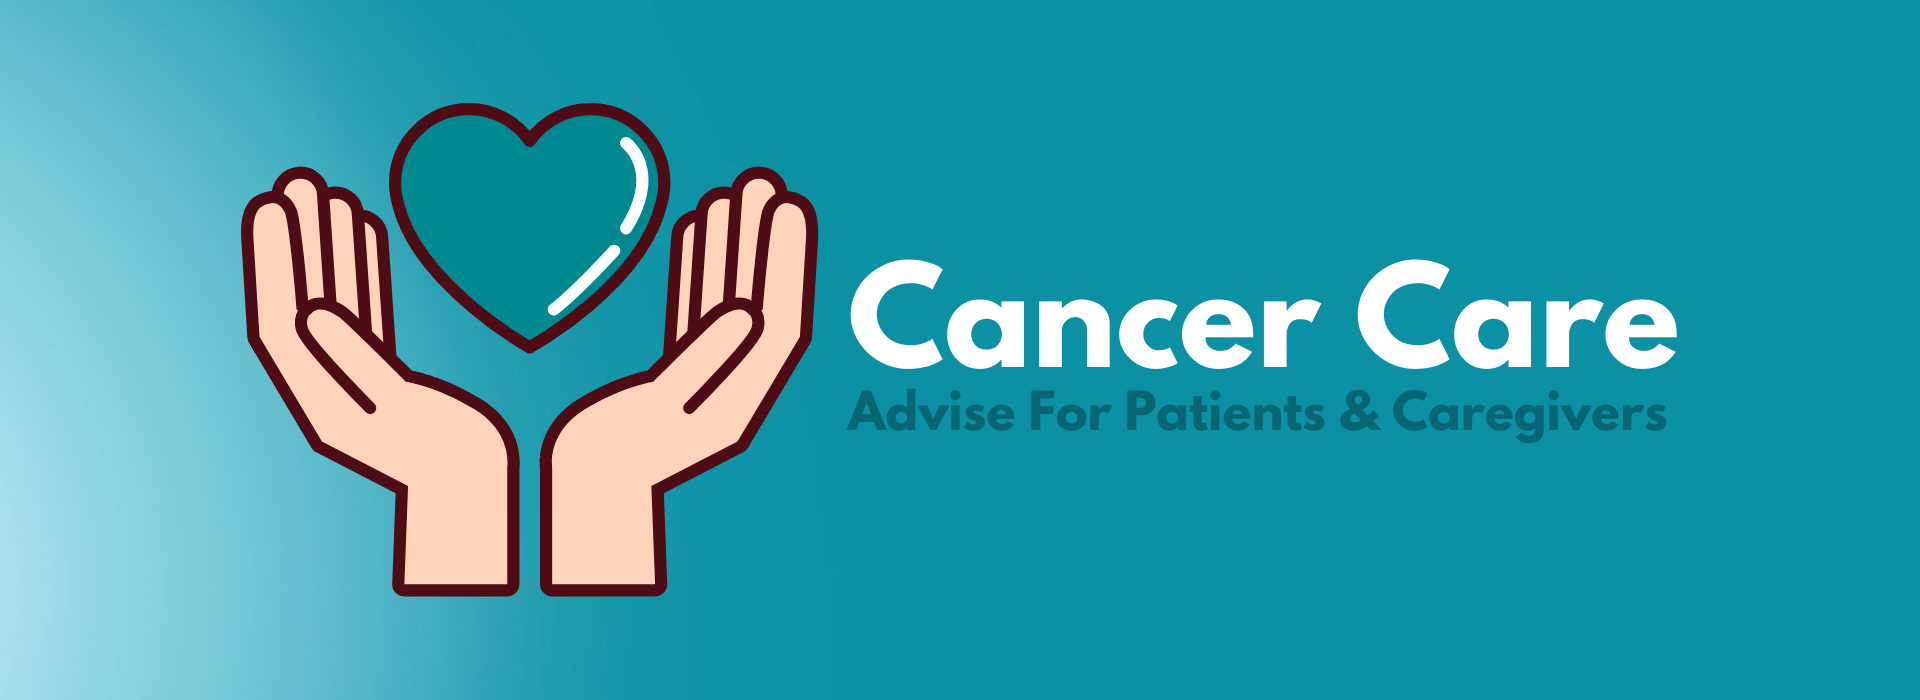 https://www.capedindia.org/wp-content/uploads/2020/07/Cancer-Care-Advice-for-patients-and-caregivers.png